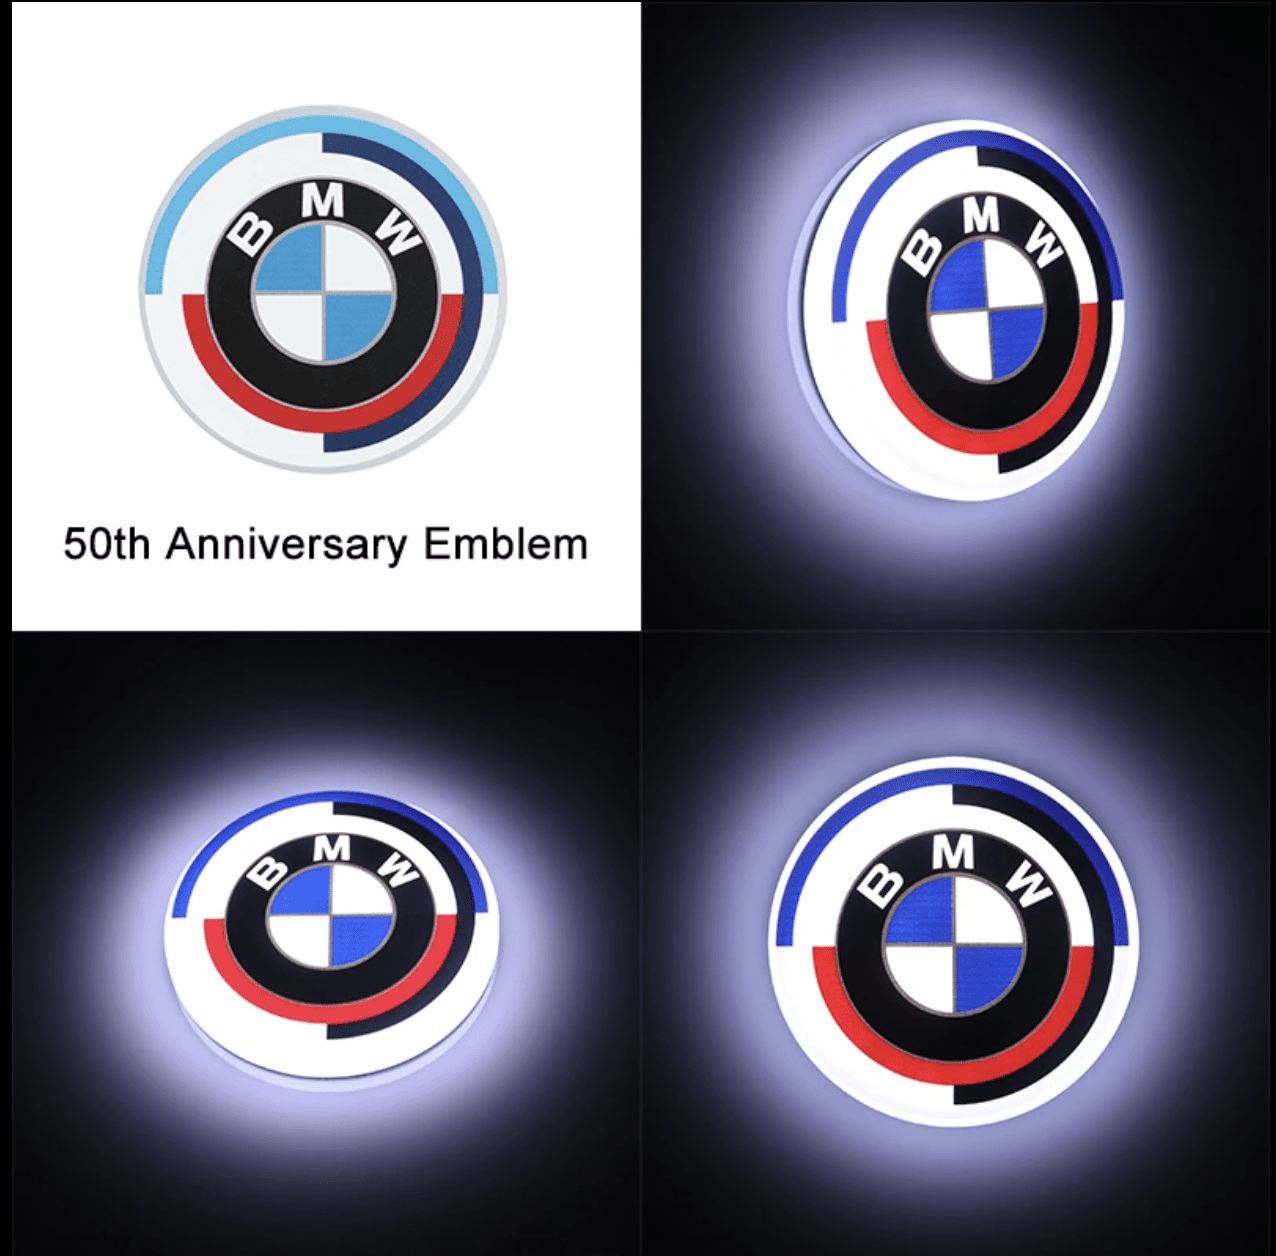 Here we have a LED Illuminated BMW Car Badge Back Light for the